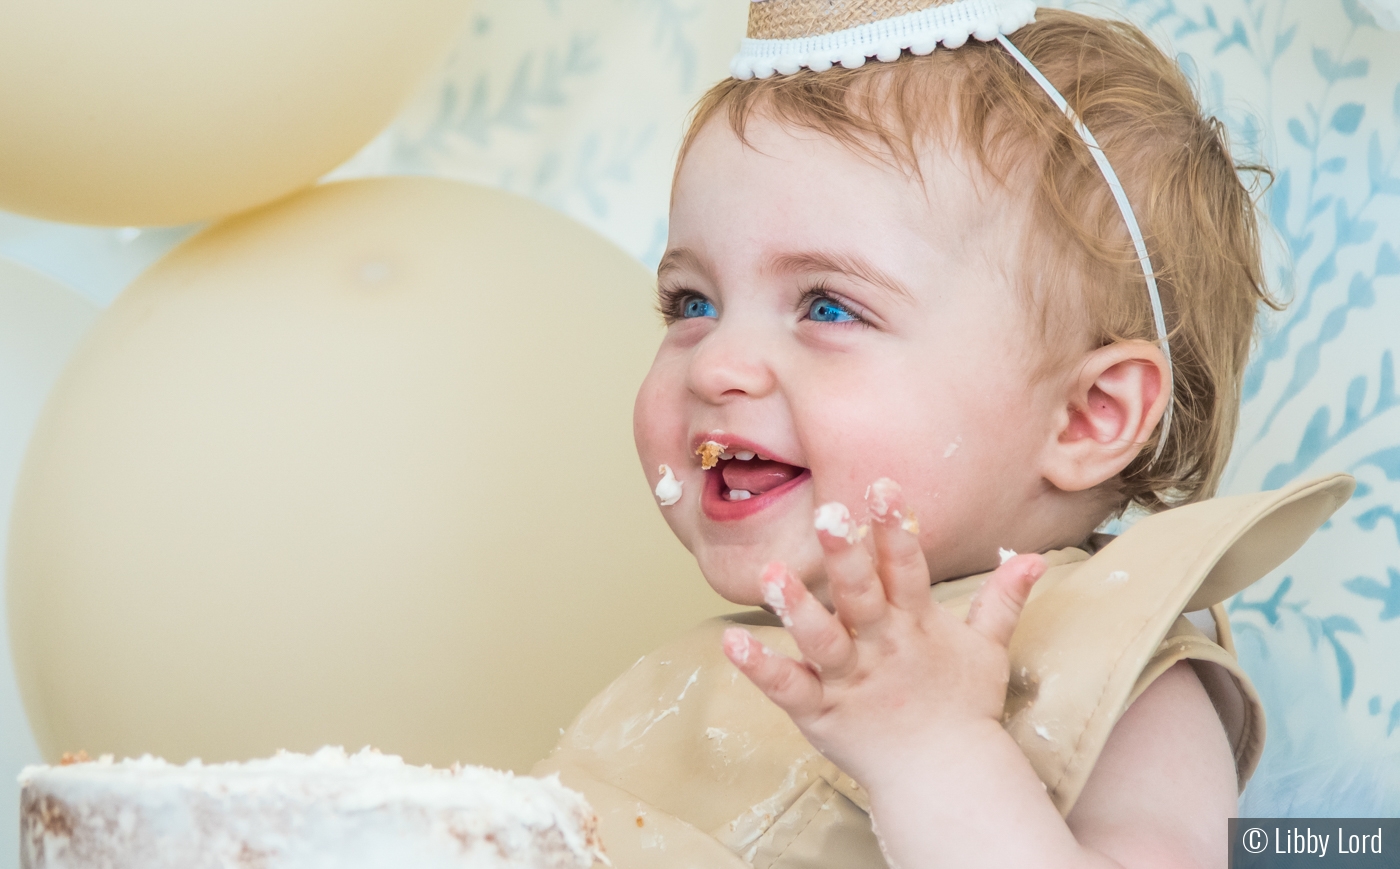 How to eat your 1st Birthday Cake by Libby Lord